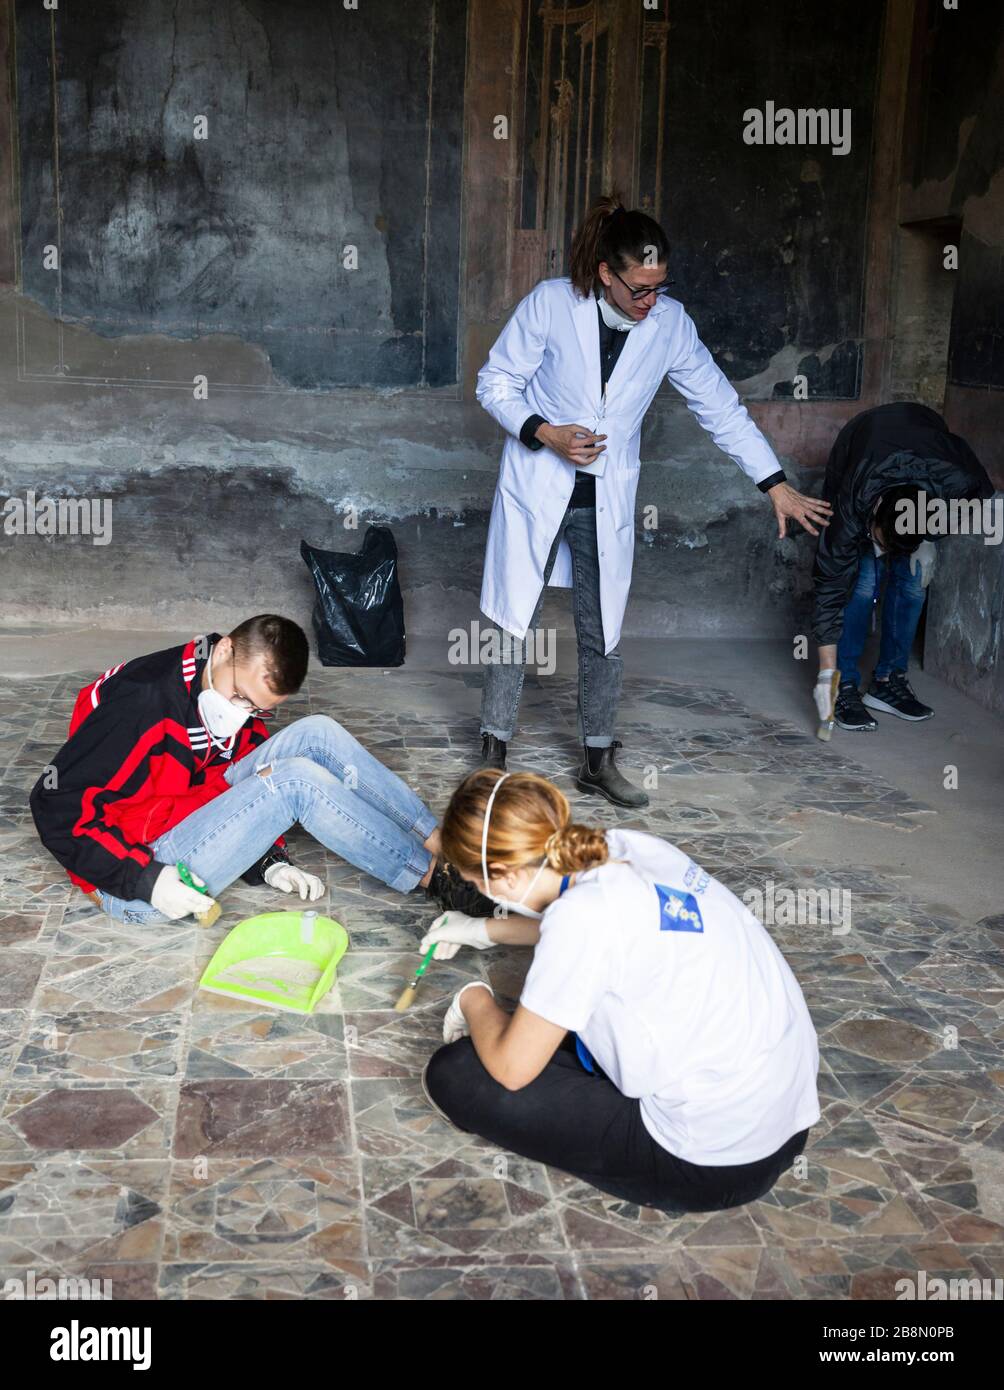 Students working under supervision clearing a floor in the ruins of Herculaneum, Campania, Italy. Stock Photo